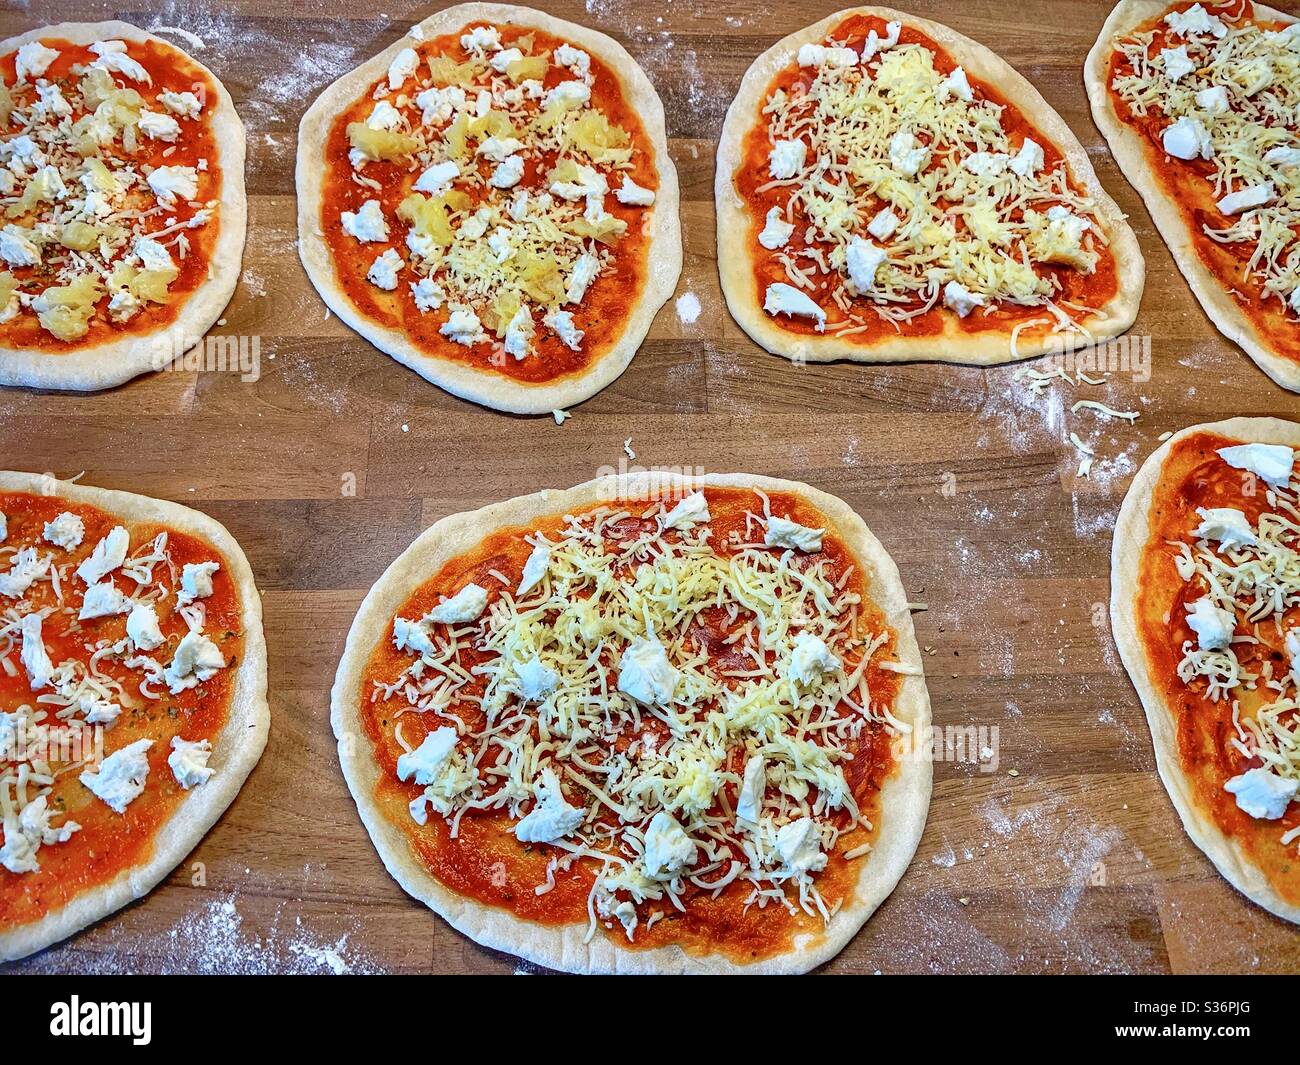 Seven uncooked homemade pizzas ready to go into the oven. On a floured walnut wood butchers block. Stock Photo